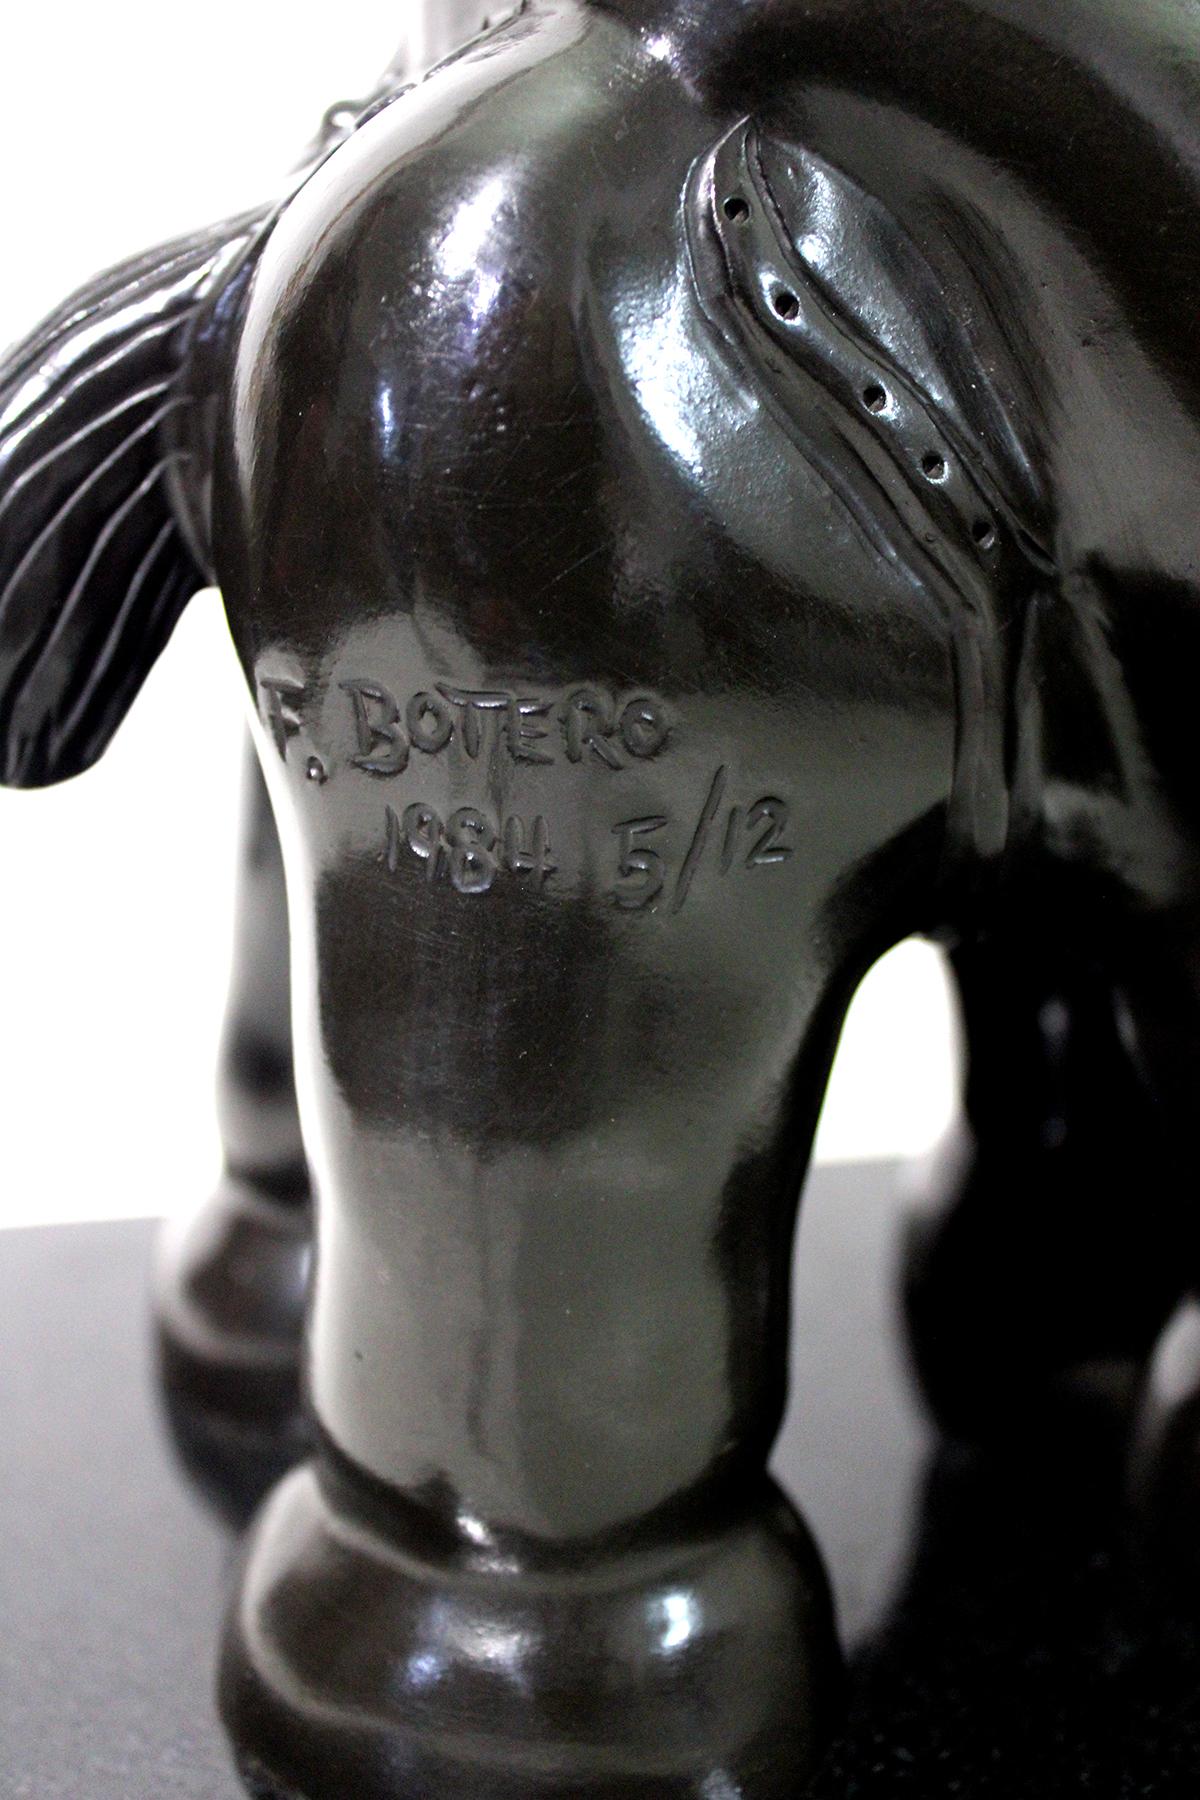 After Fernando Botero
Cast bronze sculpture by Fernando Botero, 1932 to 2023, a Colombian artist whose signature style, also known as Boterismo, depicts people and figures in large, exaggerated volume. The figurine represents a man on horseback.